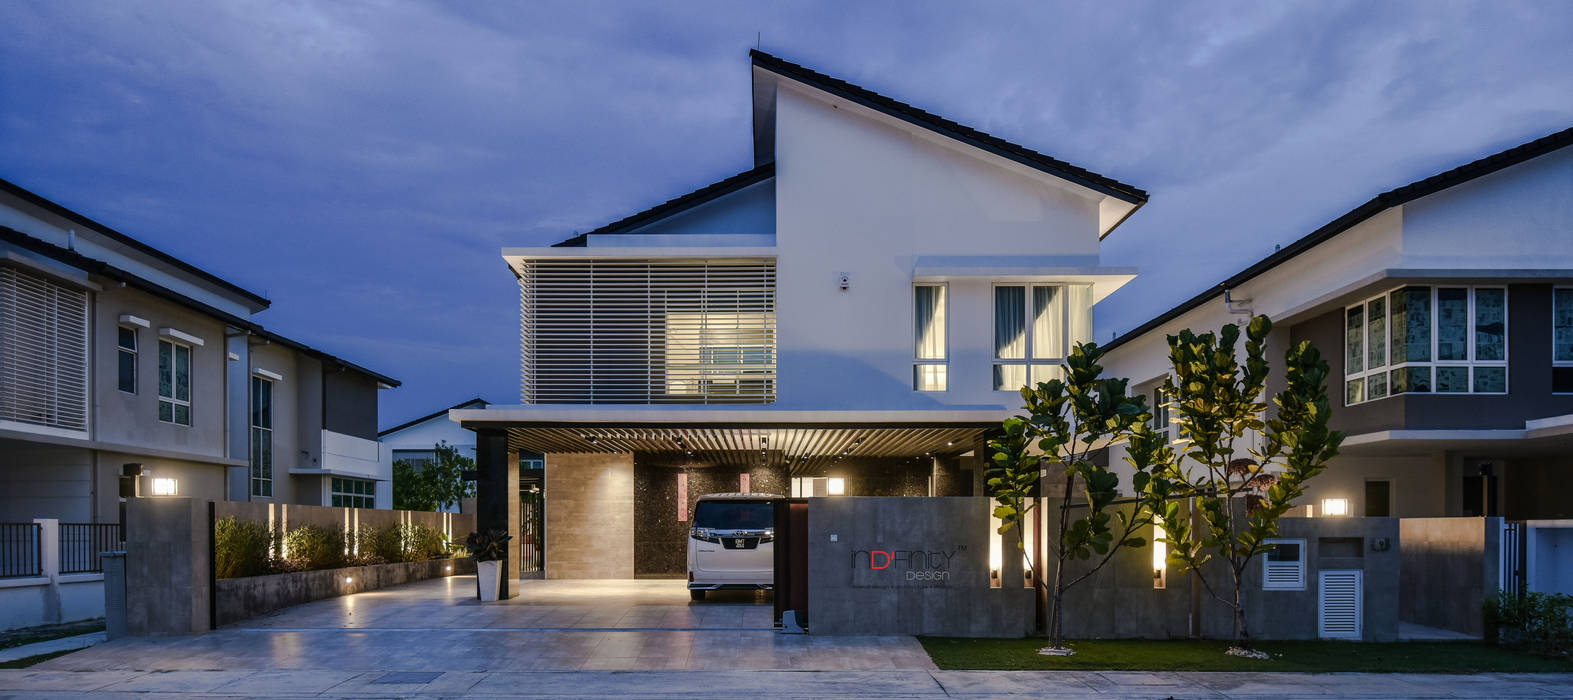 LUXURIOUS HOME, inDfinity Design (M) SDN BHD inDfinity Design (M) SDN BHD Bungalows